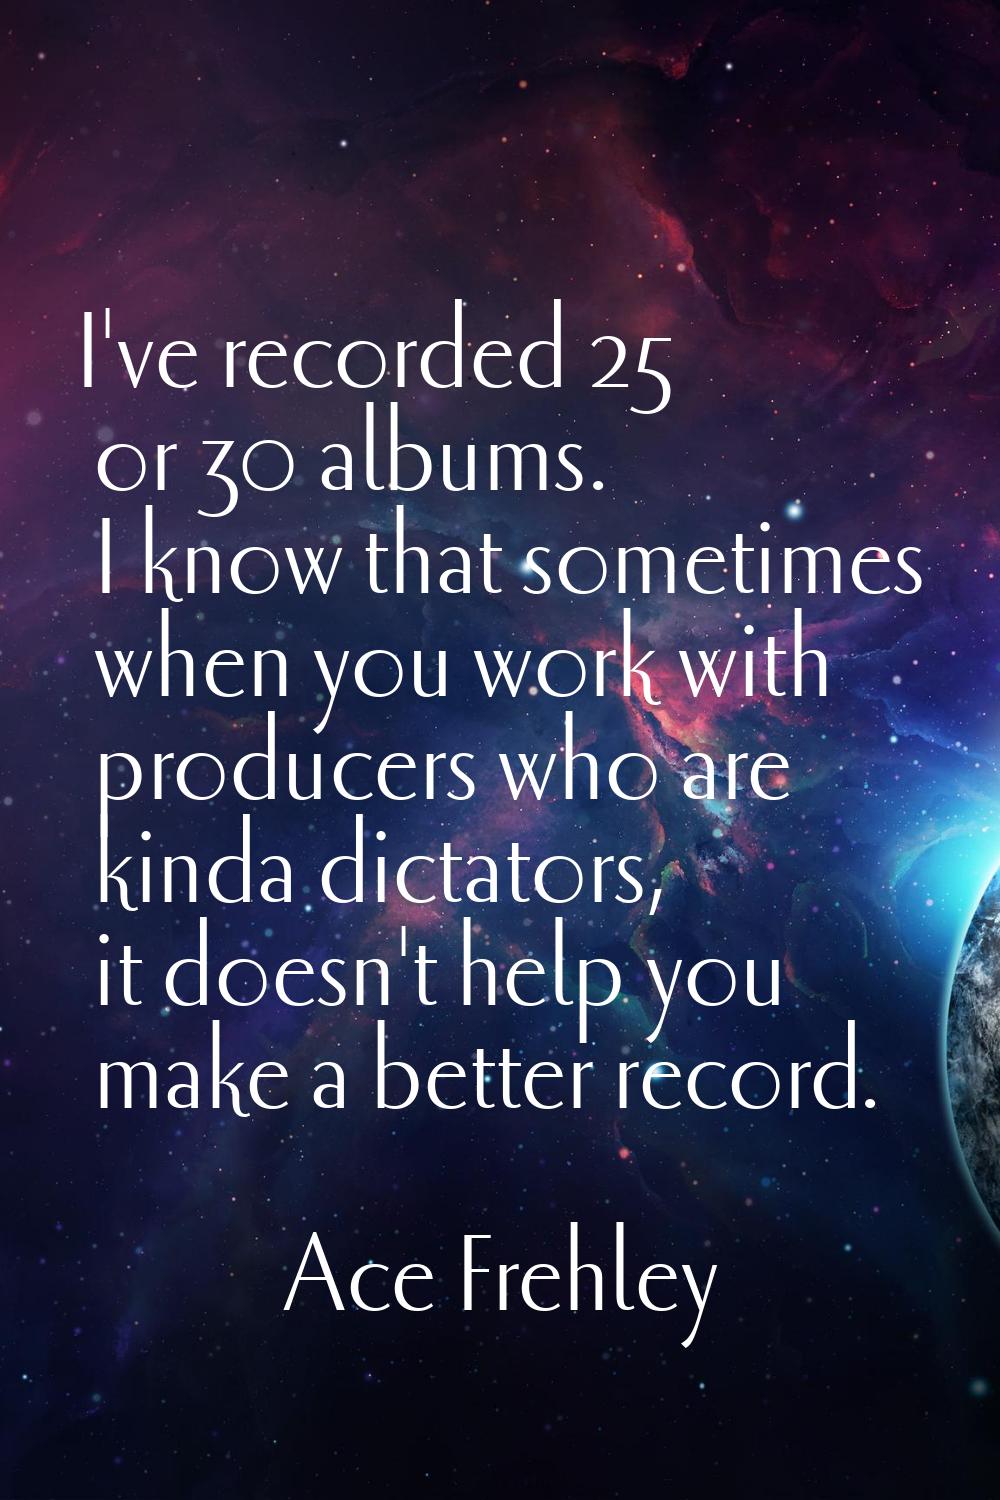 I've recorded 25 or 30 albums. I know that sometimes when you work with producers who are kinda dic